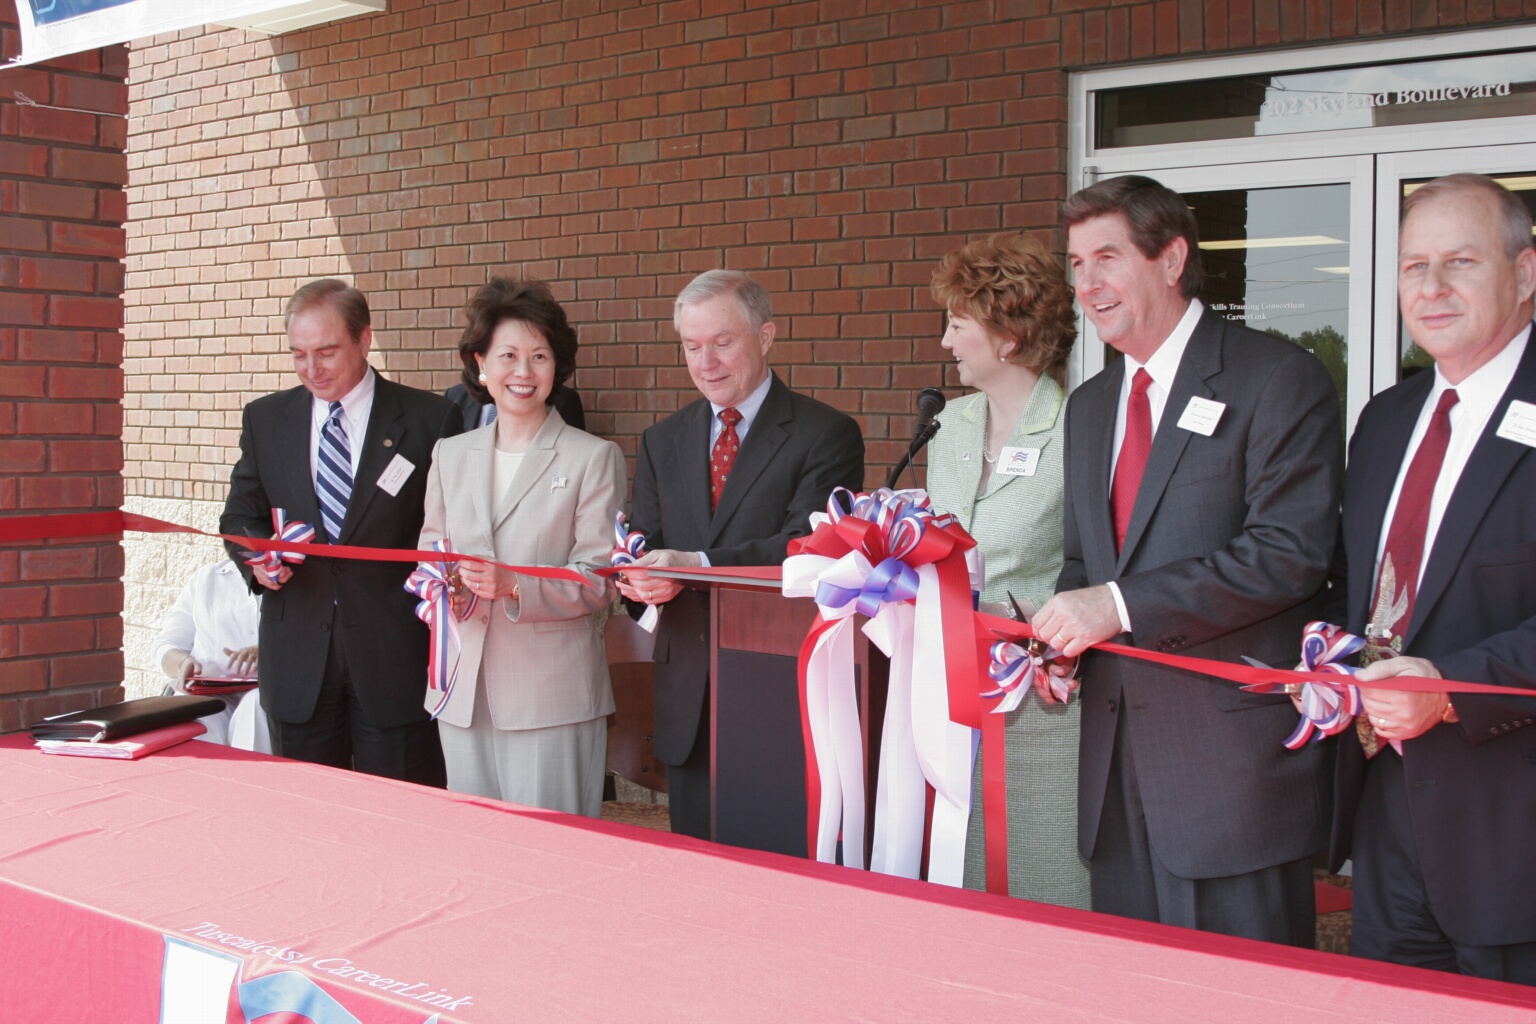 Secretary Elaine Chao opening a new one-stop career center in Tuscaloosa, Alabama with U. S. Senator Jeff Sessions and Governor Bob Riley attending.